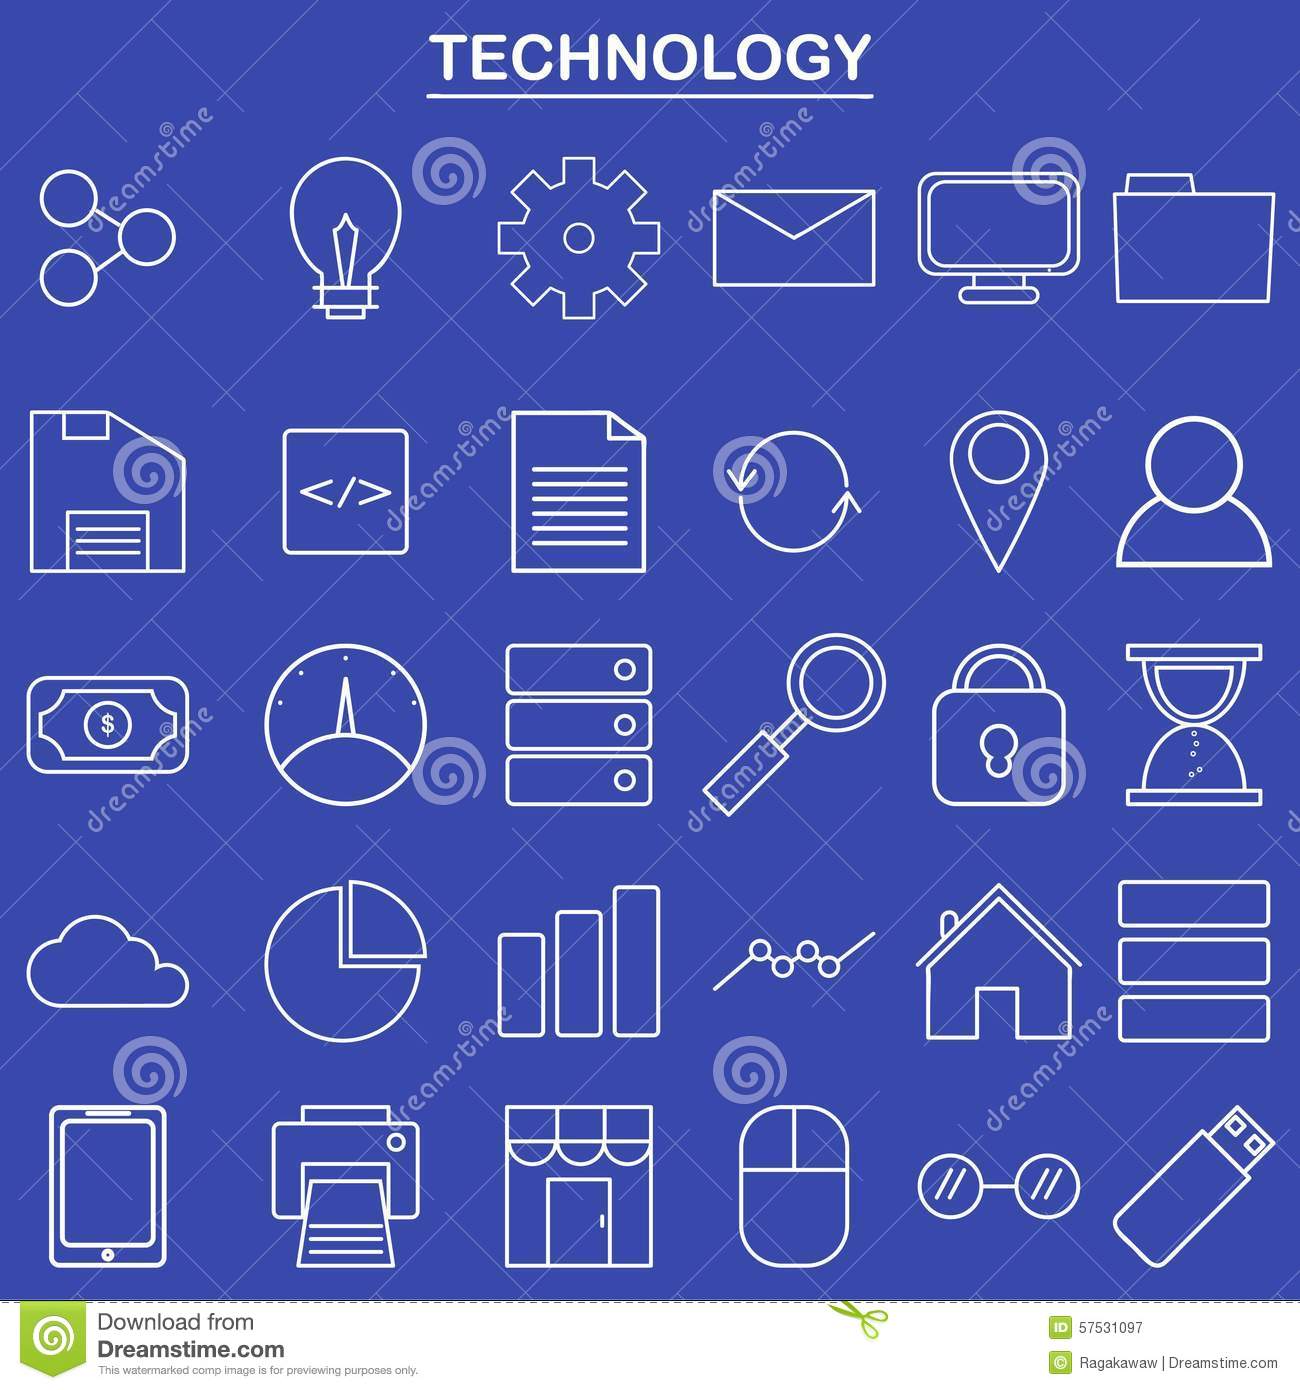 Website Technology Icon